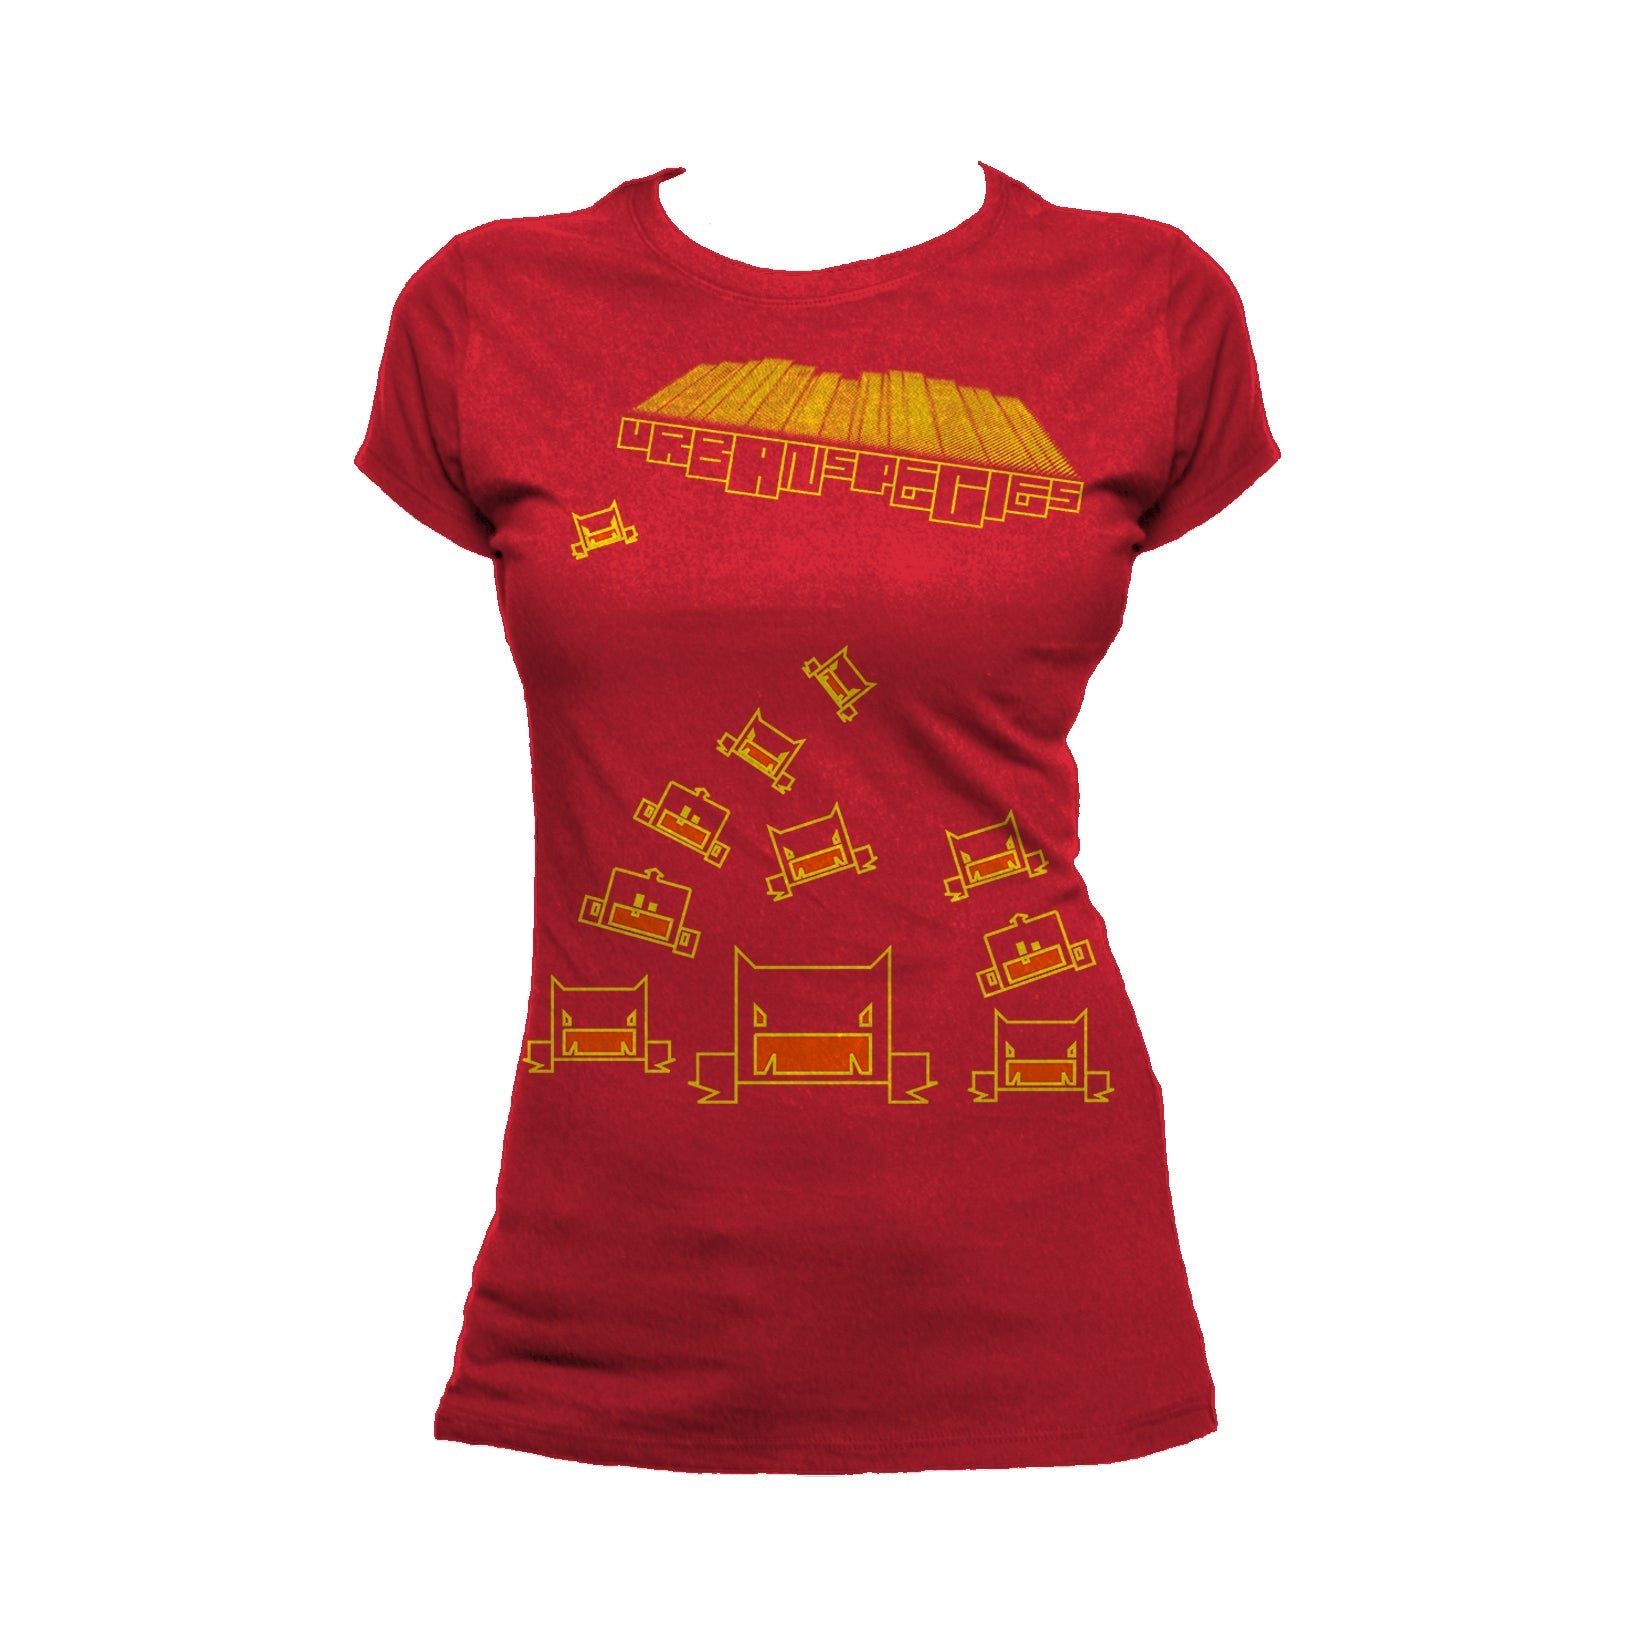 US Brand X Sci Funk Urban Invaders Official Women's T-Shirt ()